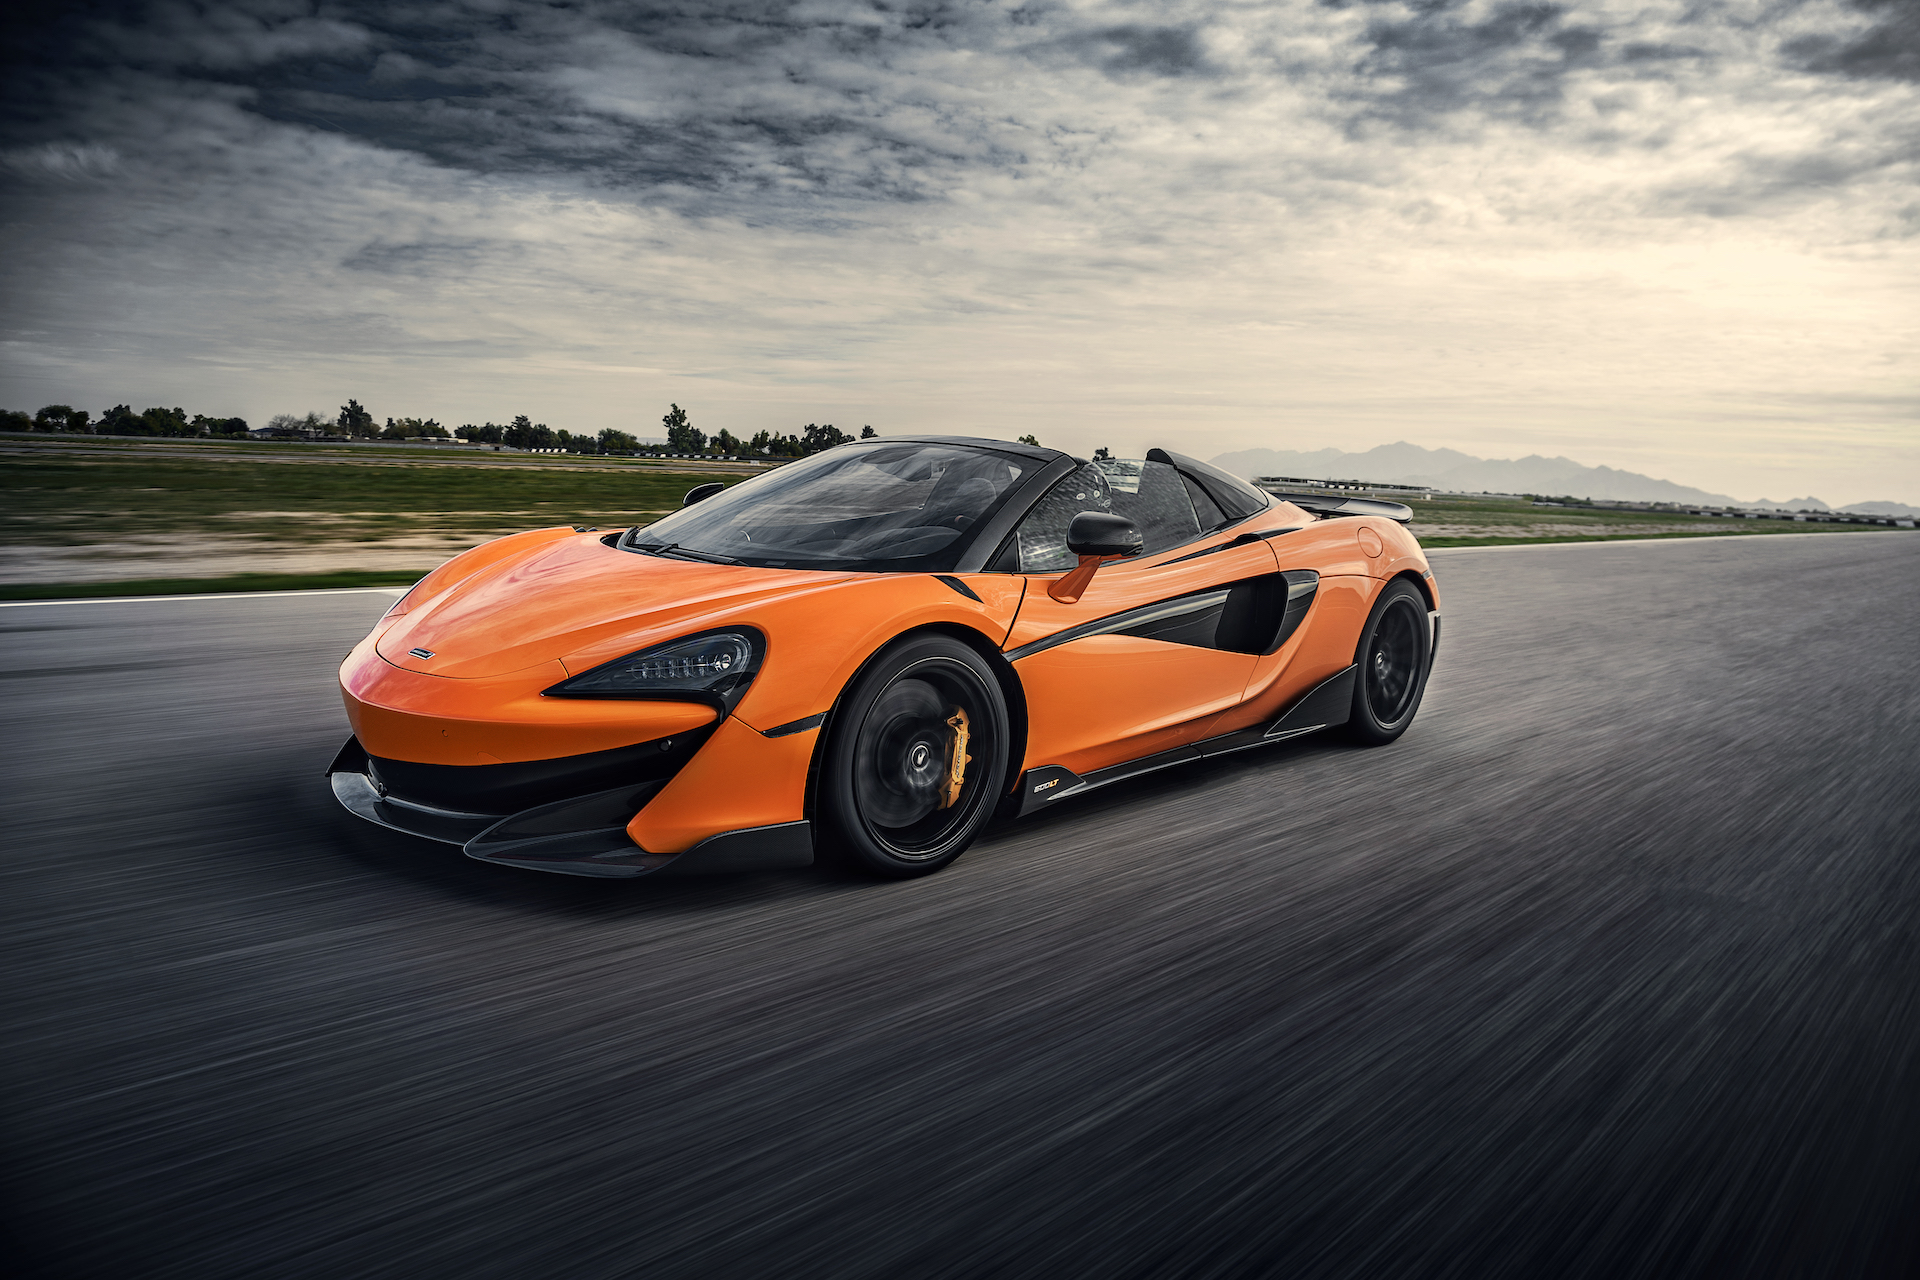 First drive review: 2020 McLaren 600LT Spider sounds serious, delivers on  the track